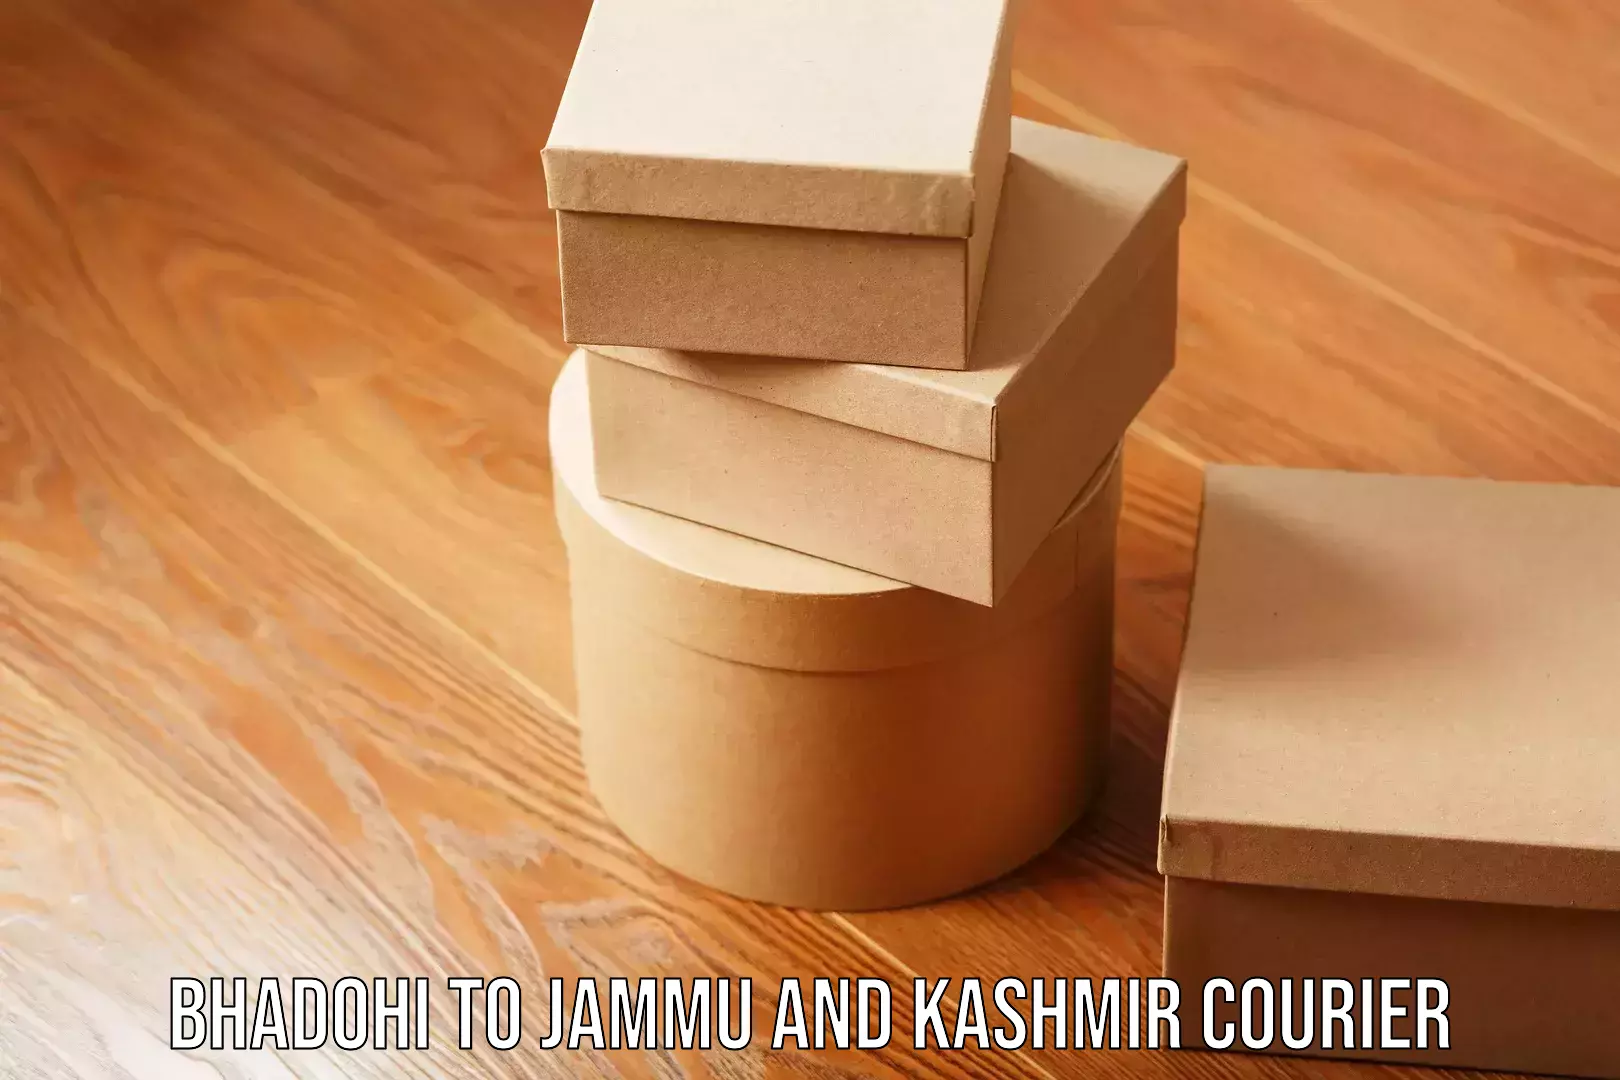 User-friendly delivery service Bhadohi to Jammu and Kashmir